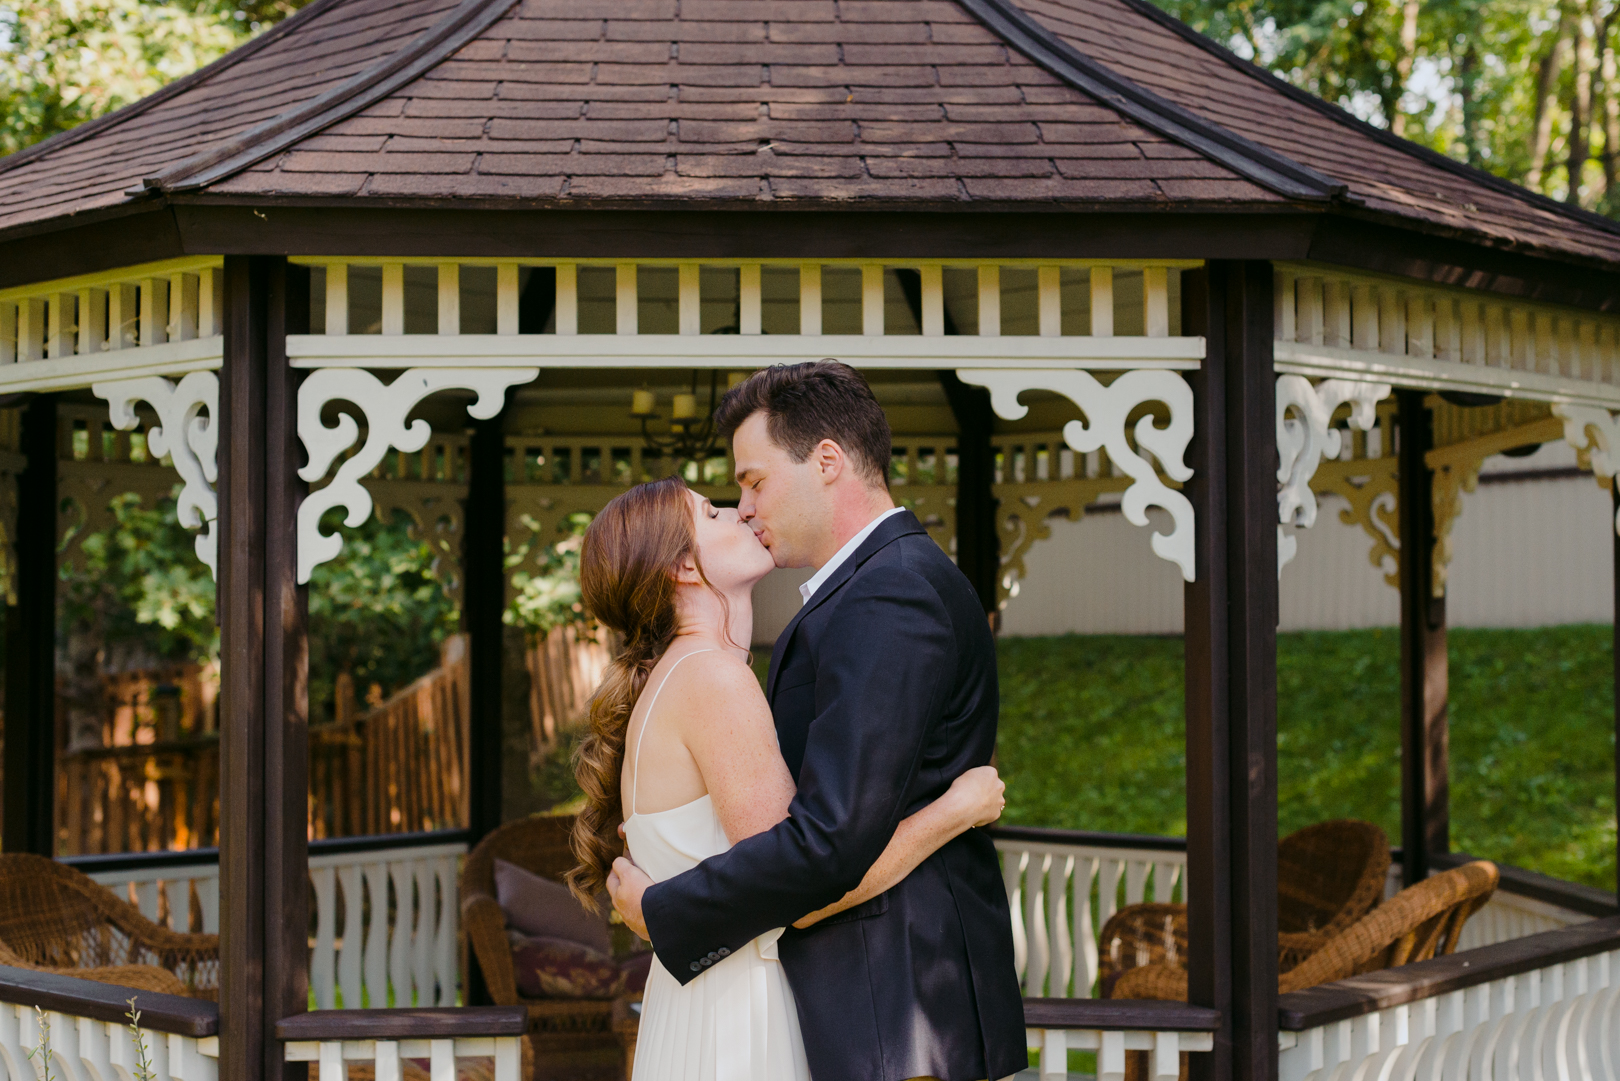 bride and groom first kiss in front of pergola during backyard wedding ceremony